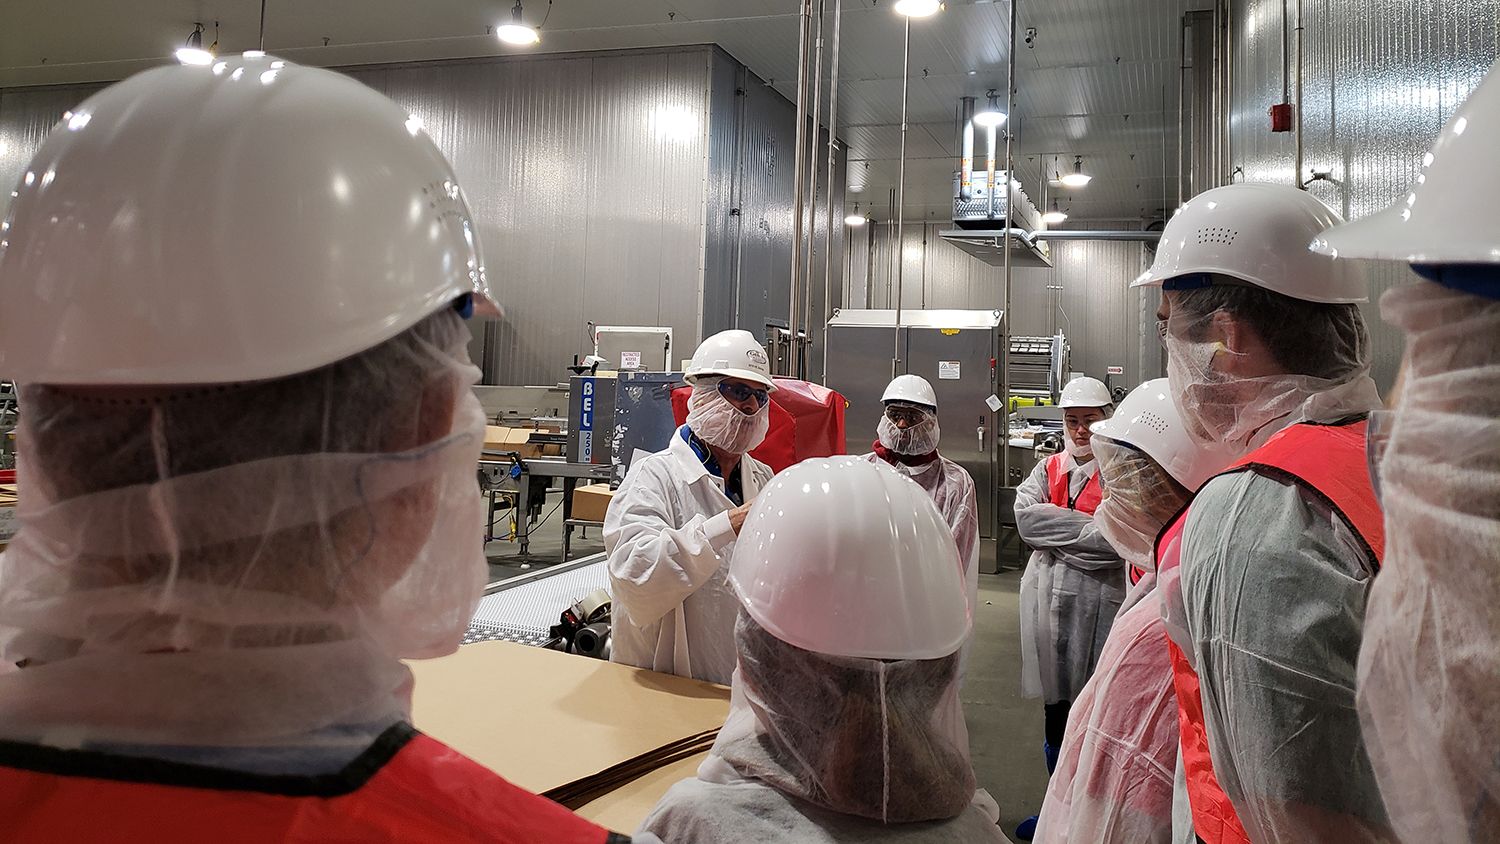 students in health and safety gear listen to a guide in a poultry processing plant